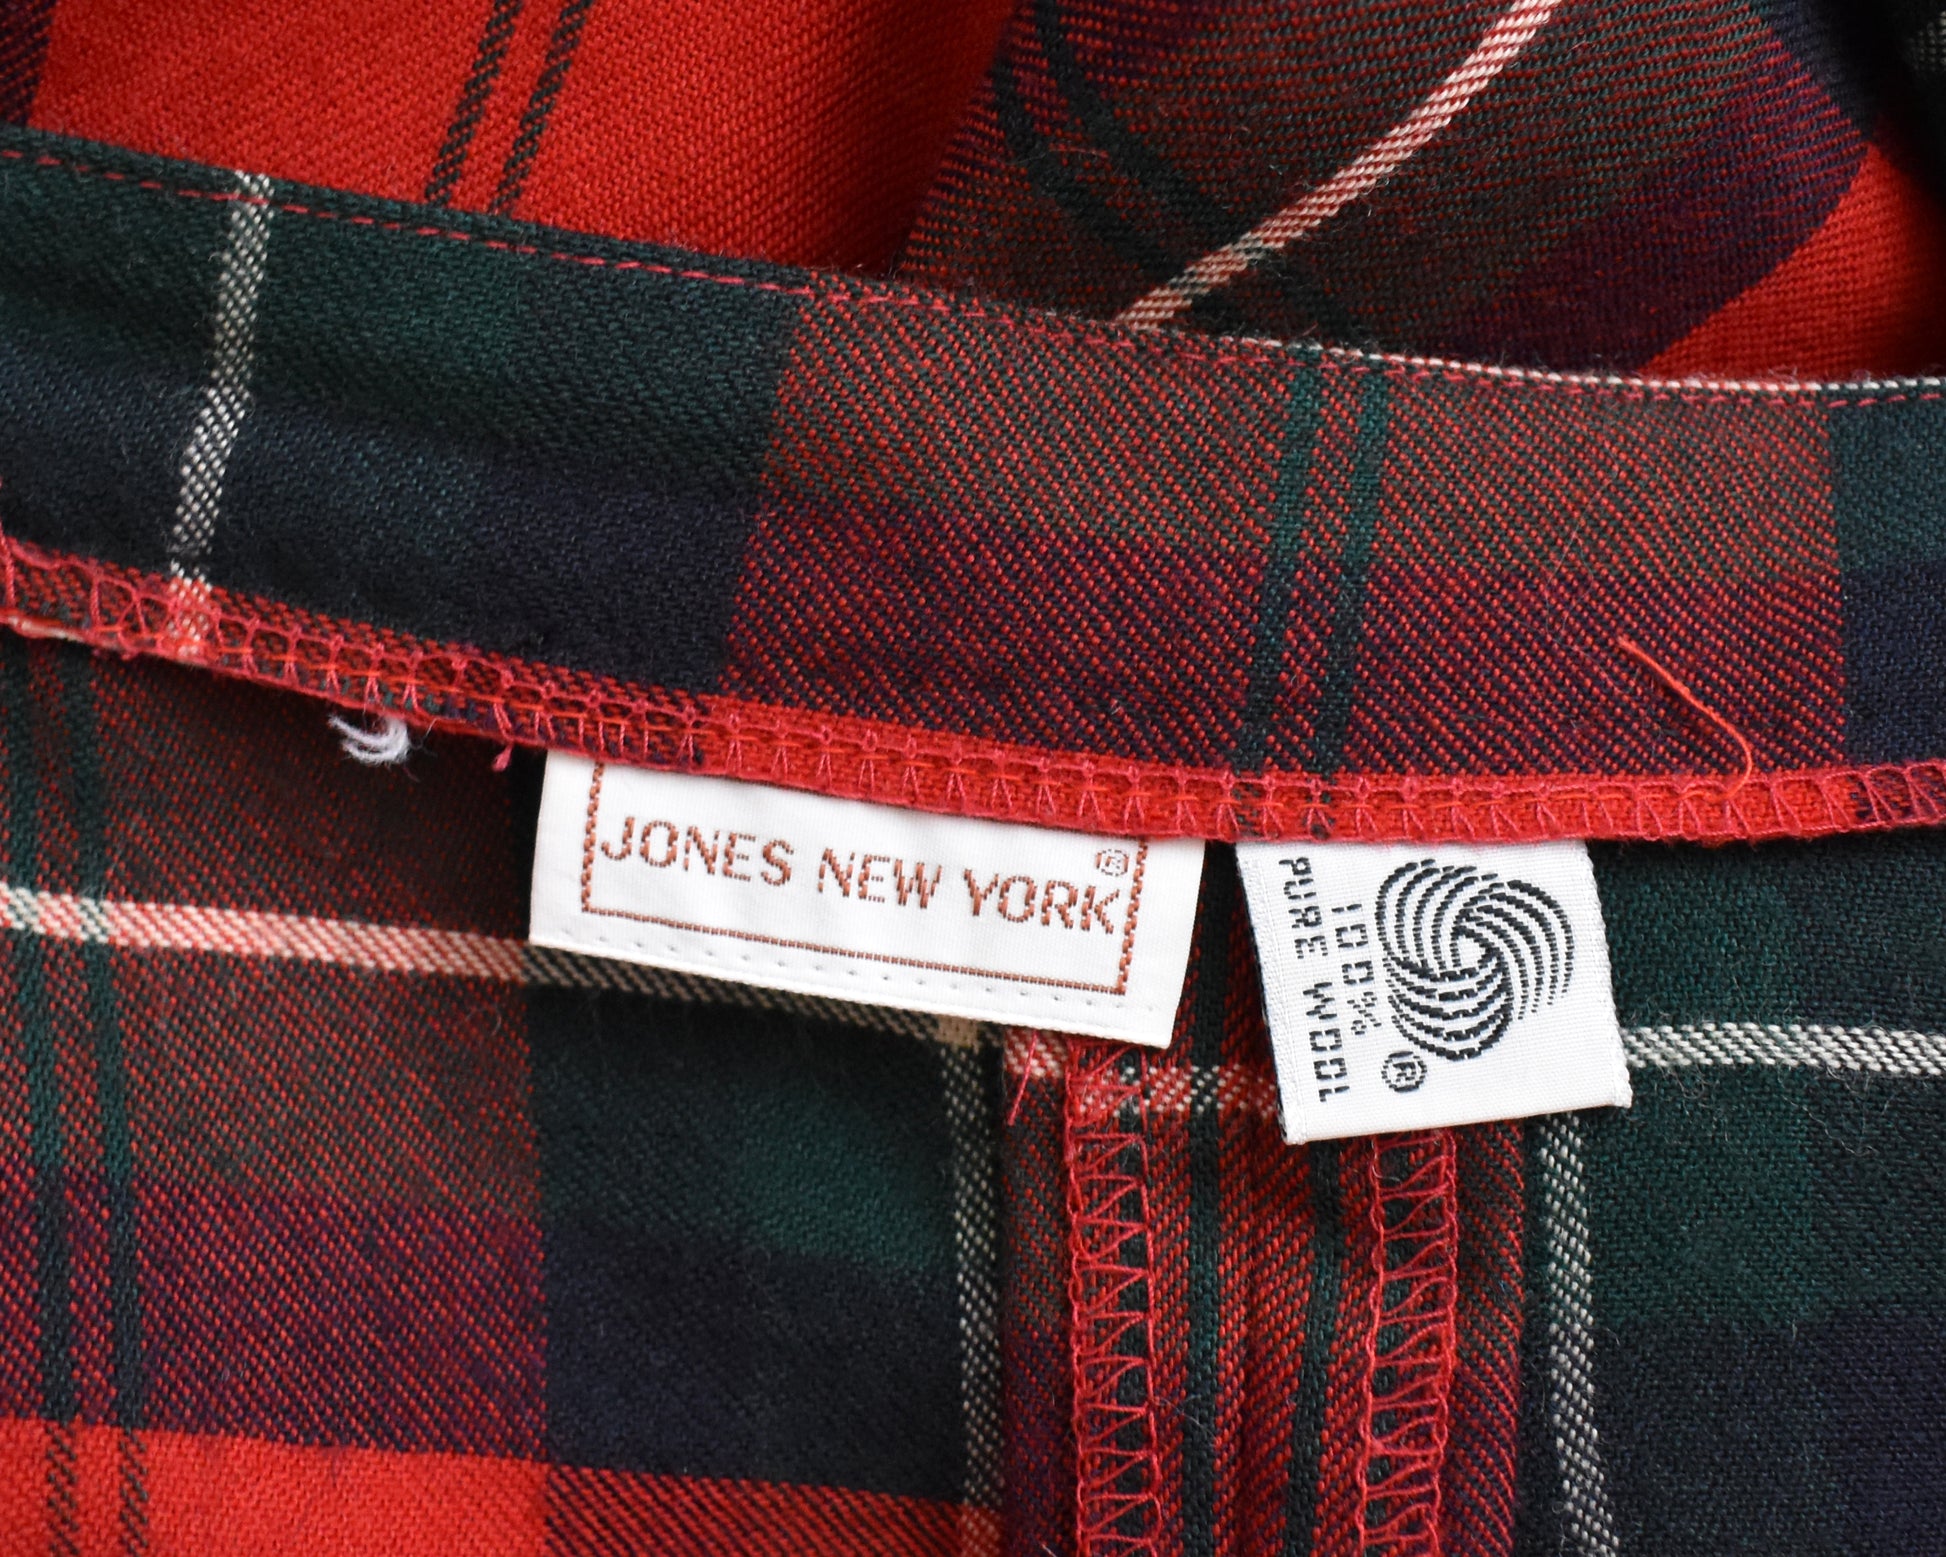 Close up of the Jones New York tag and 100% pure wool tag